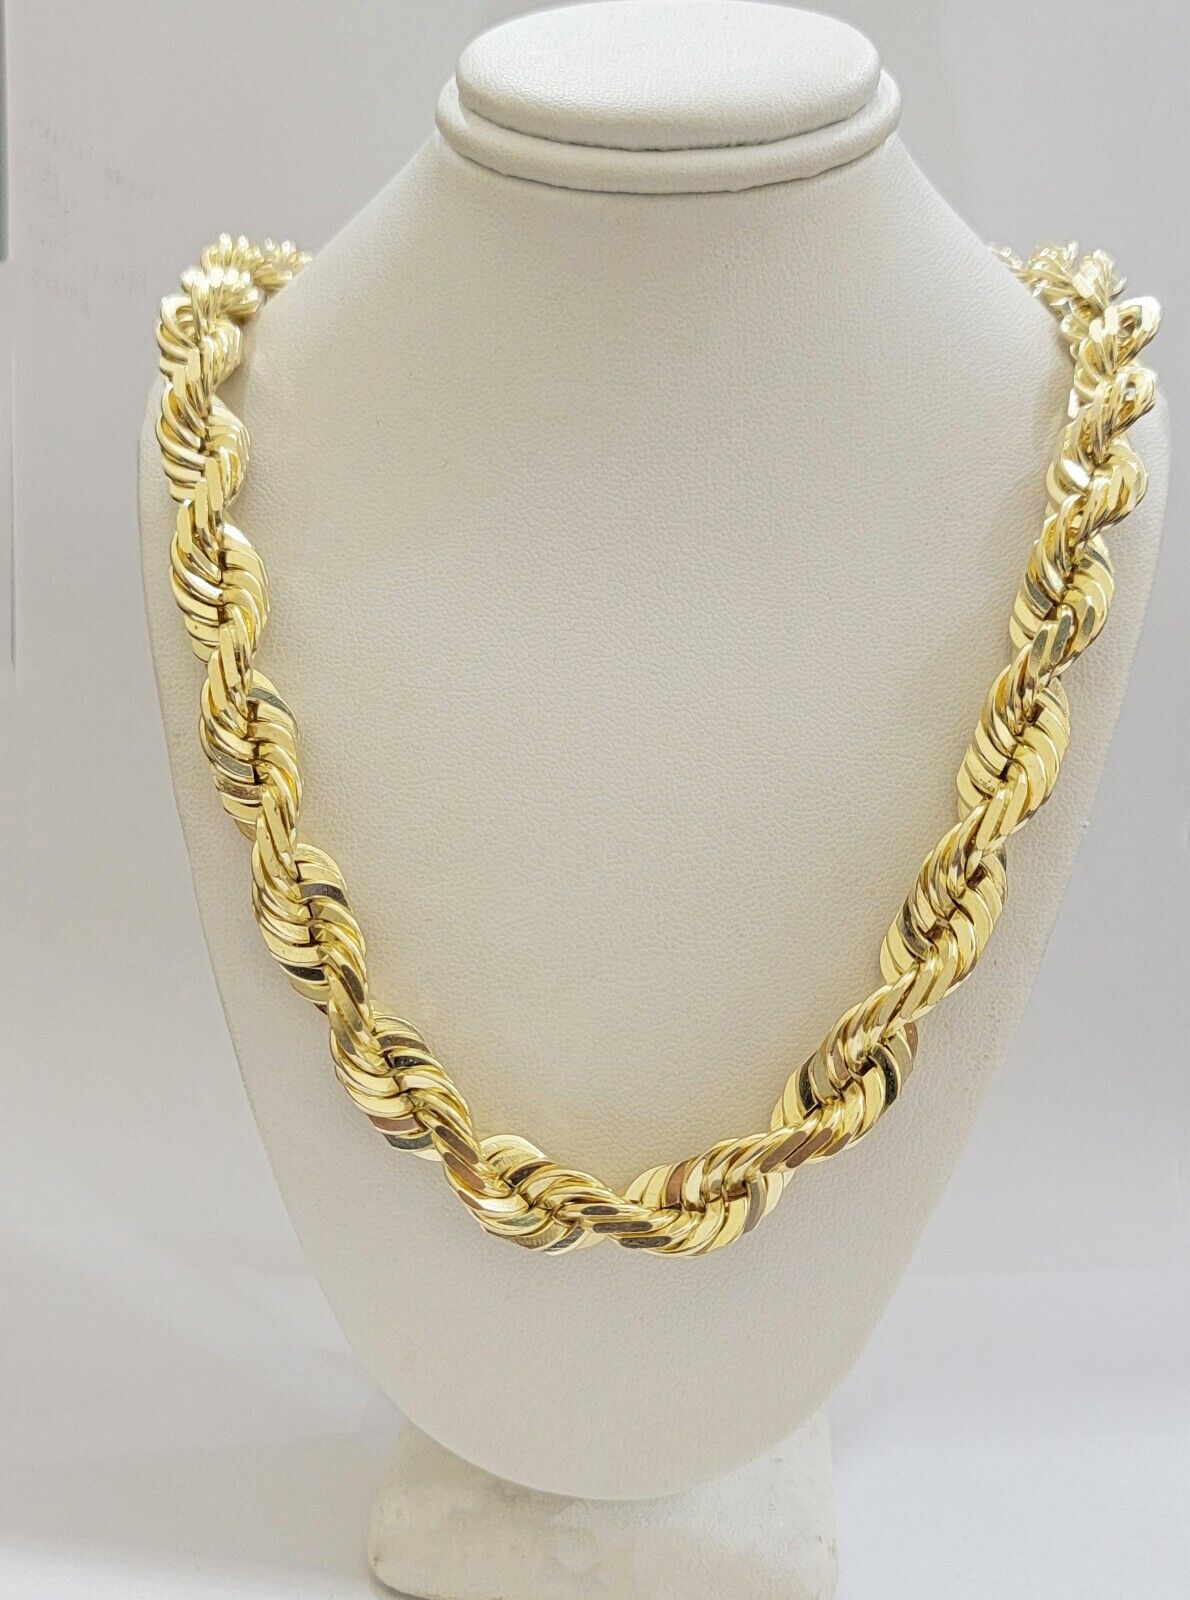 10mm Solid 10k Yellow Gold Rope Chain Necklace 26" Inch Mens Thick & Heavy Shiny